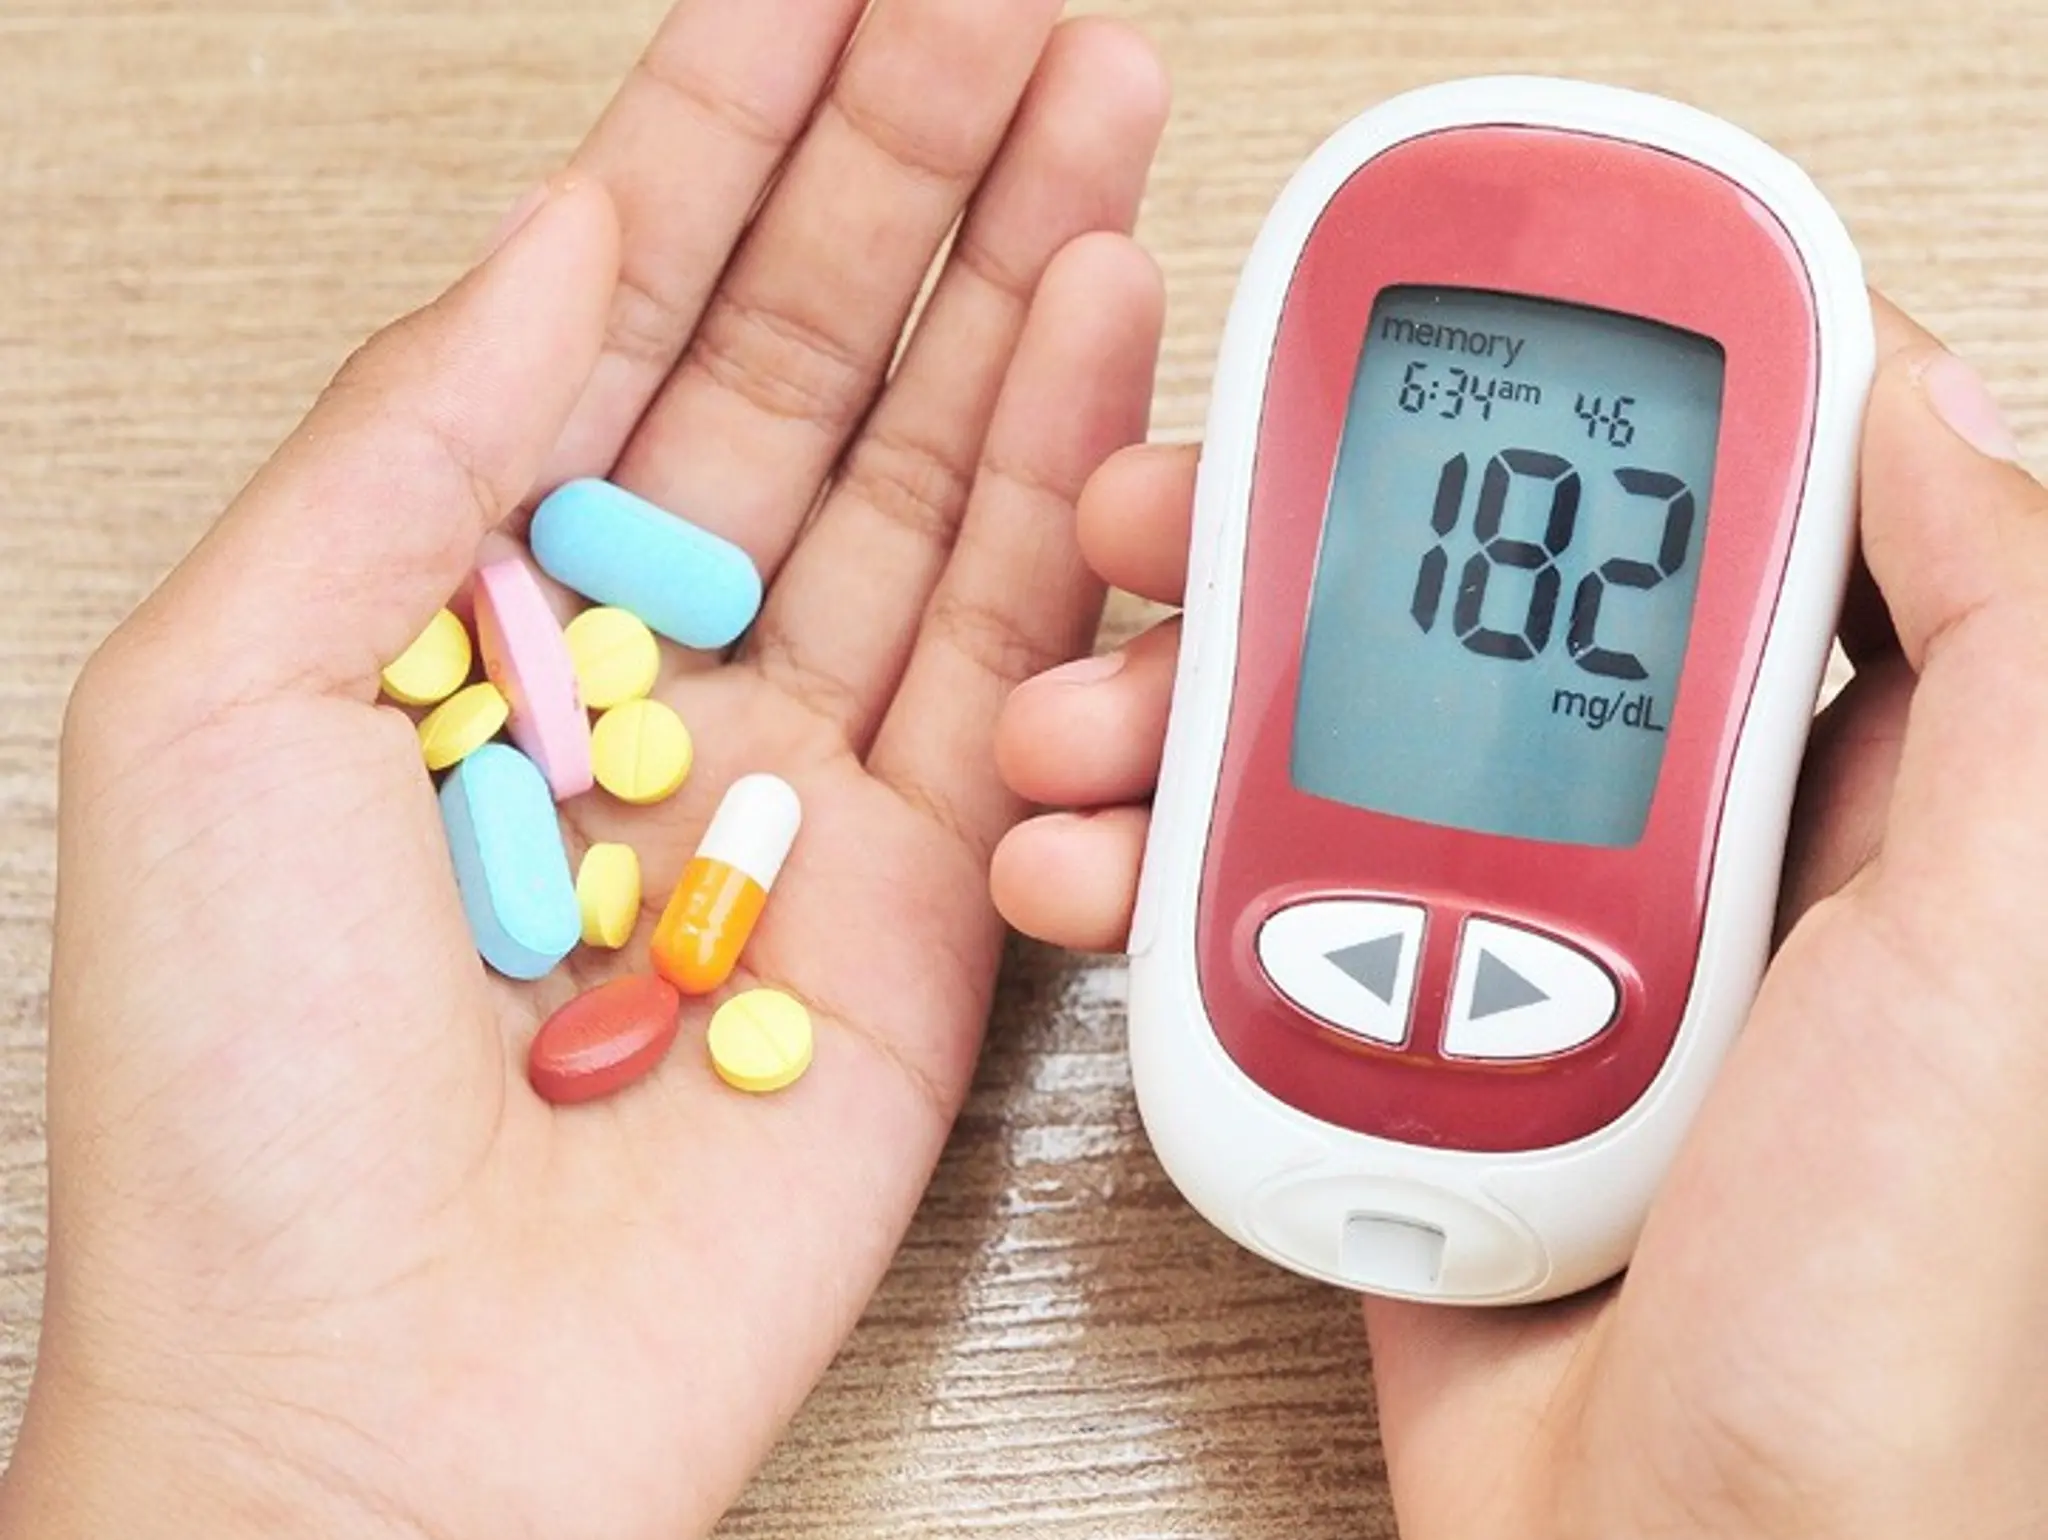 TheracosBio’s Oral Drug Approved By FDA For Adults With Type 2 Diabetes